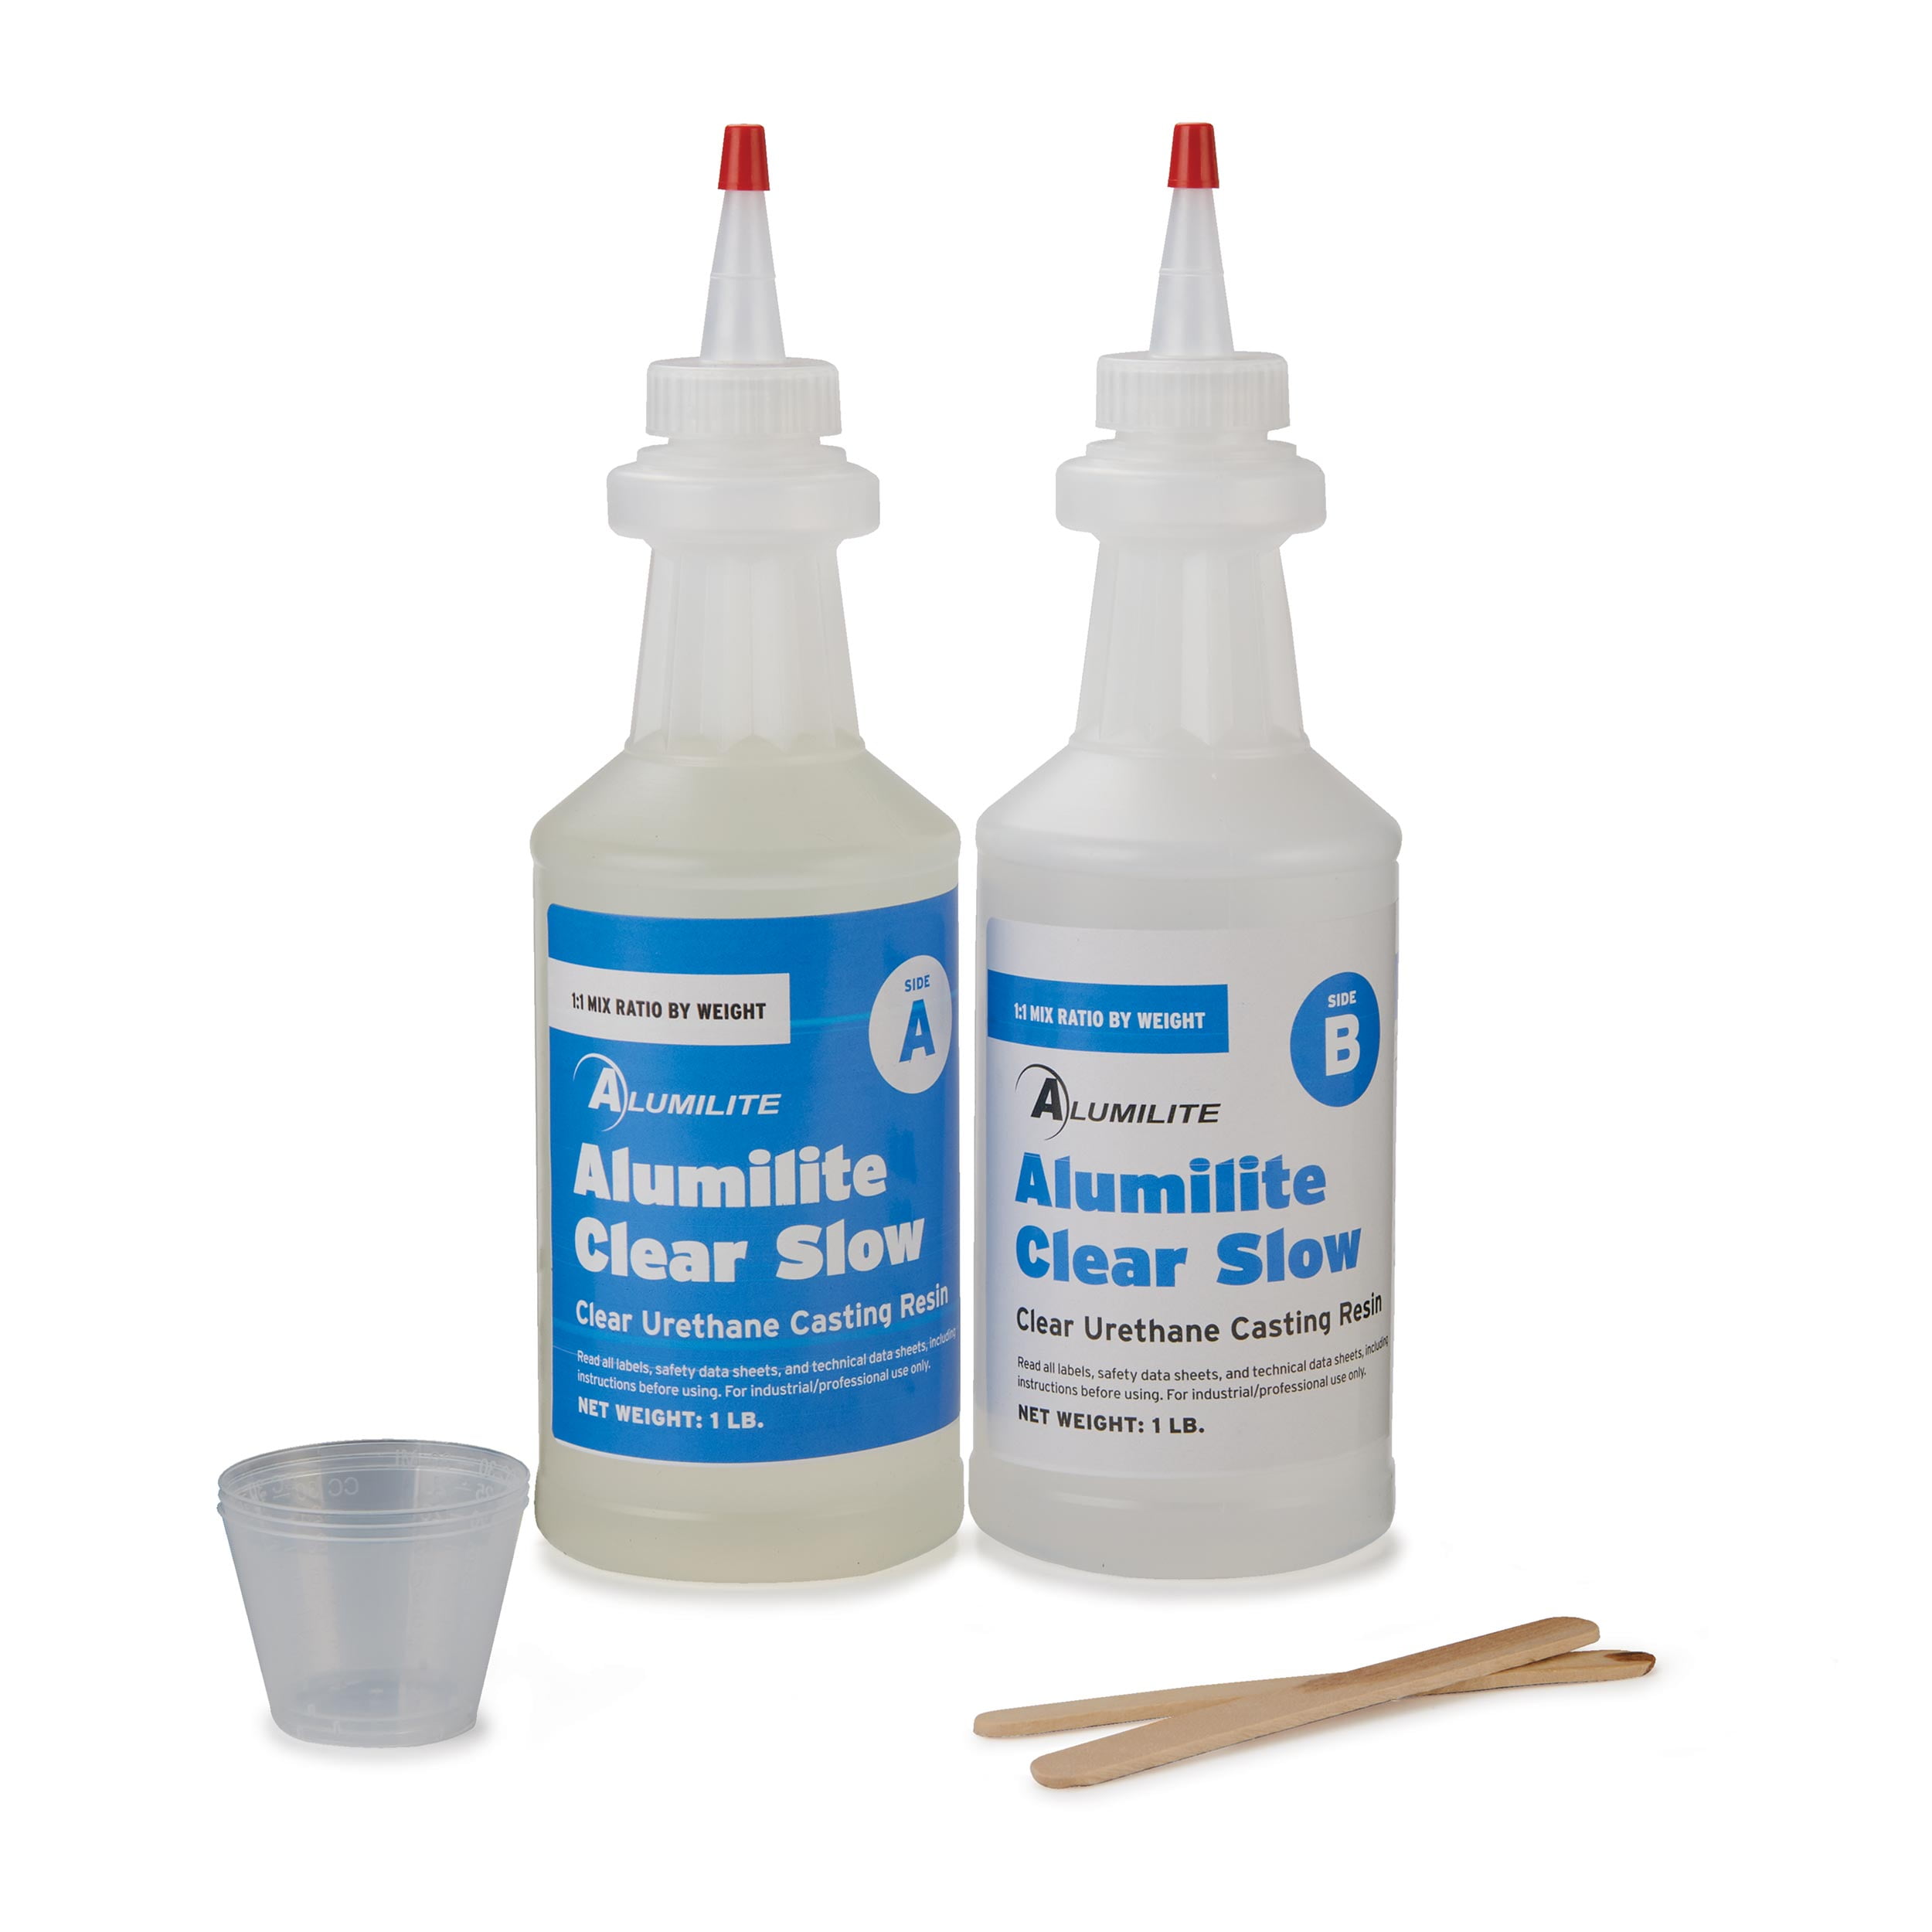  Alumilite AlumiRes (RC-3) Urethane Casting Resin Black [1 gal A  + 1 gal B(2 gallons) Two-Part Kit] Great for Small, Large, Durable Pieces  such as Rock Climbing Holds, Medical Parts, Architecture